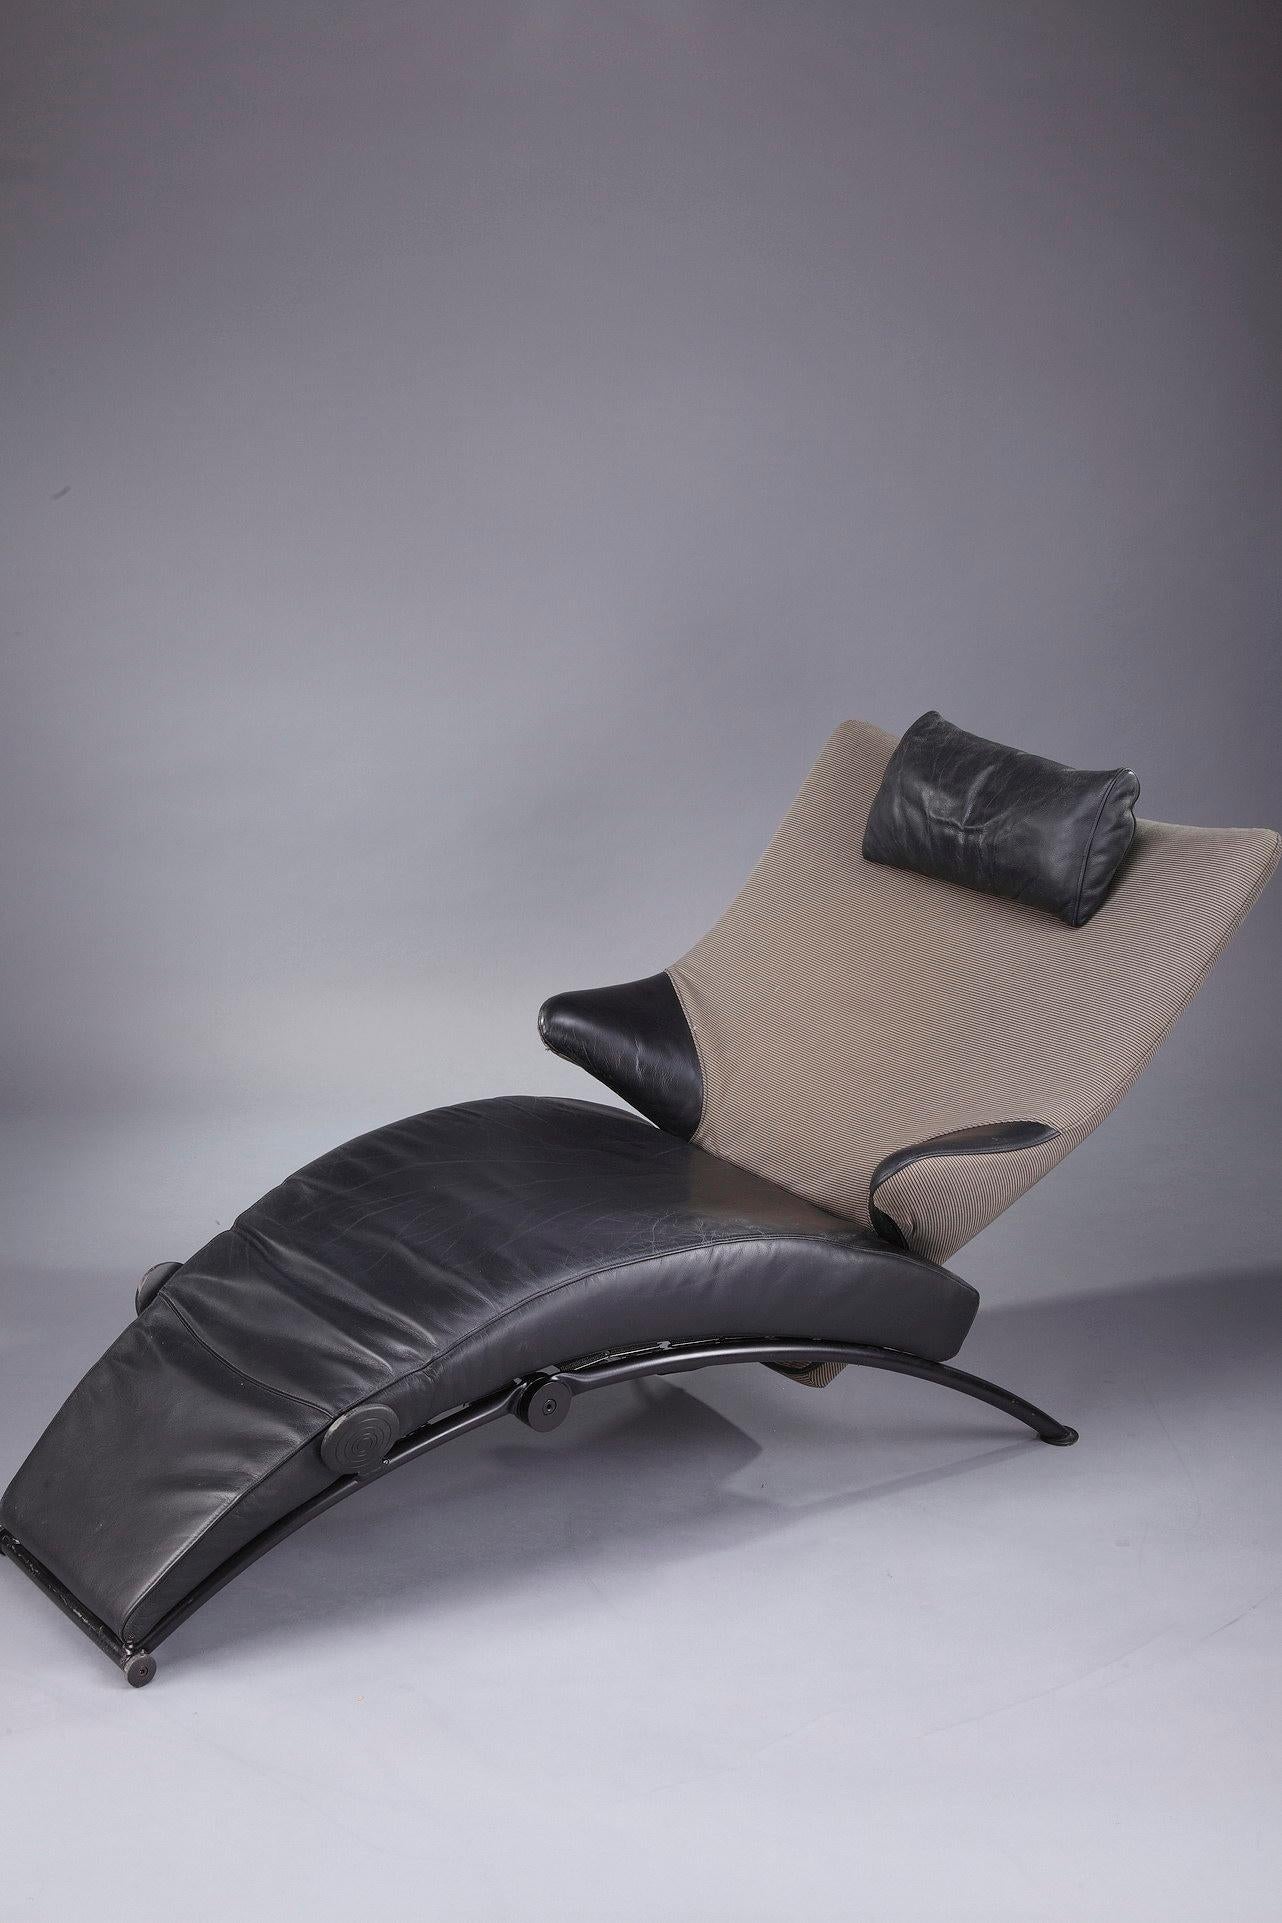 Leather Solo 699 folding lounge chair designed by Stefan Heiliger (b. 1941 in Berlin), manufactured in the 1980s in Germany. Black lacquered metal frame. Seat, ottoman, arm and headrest covered with black leather. Adjustable backrest, covered with